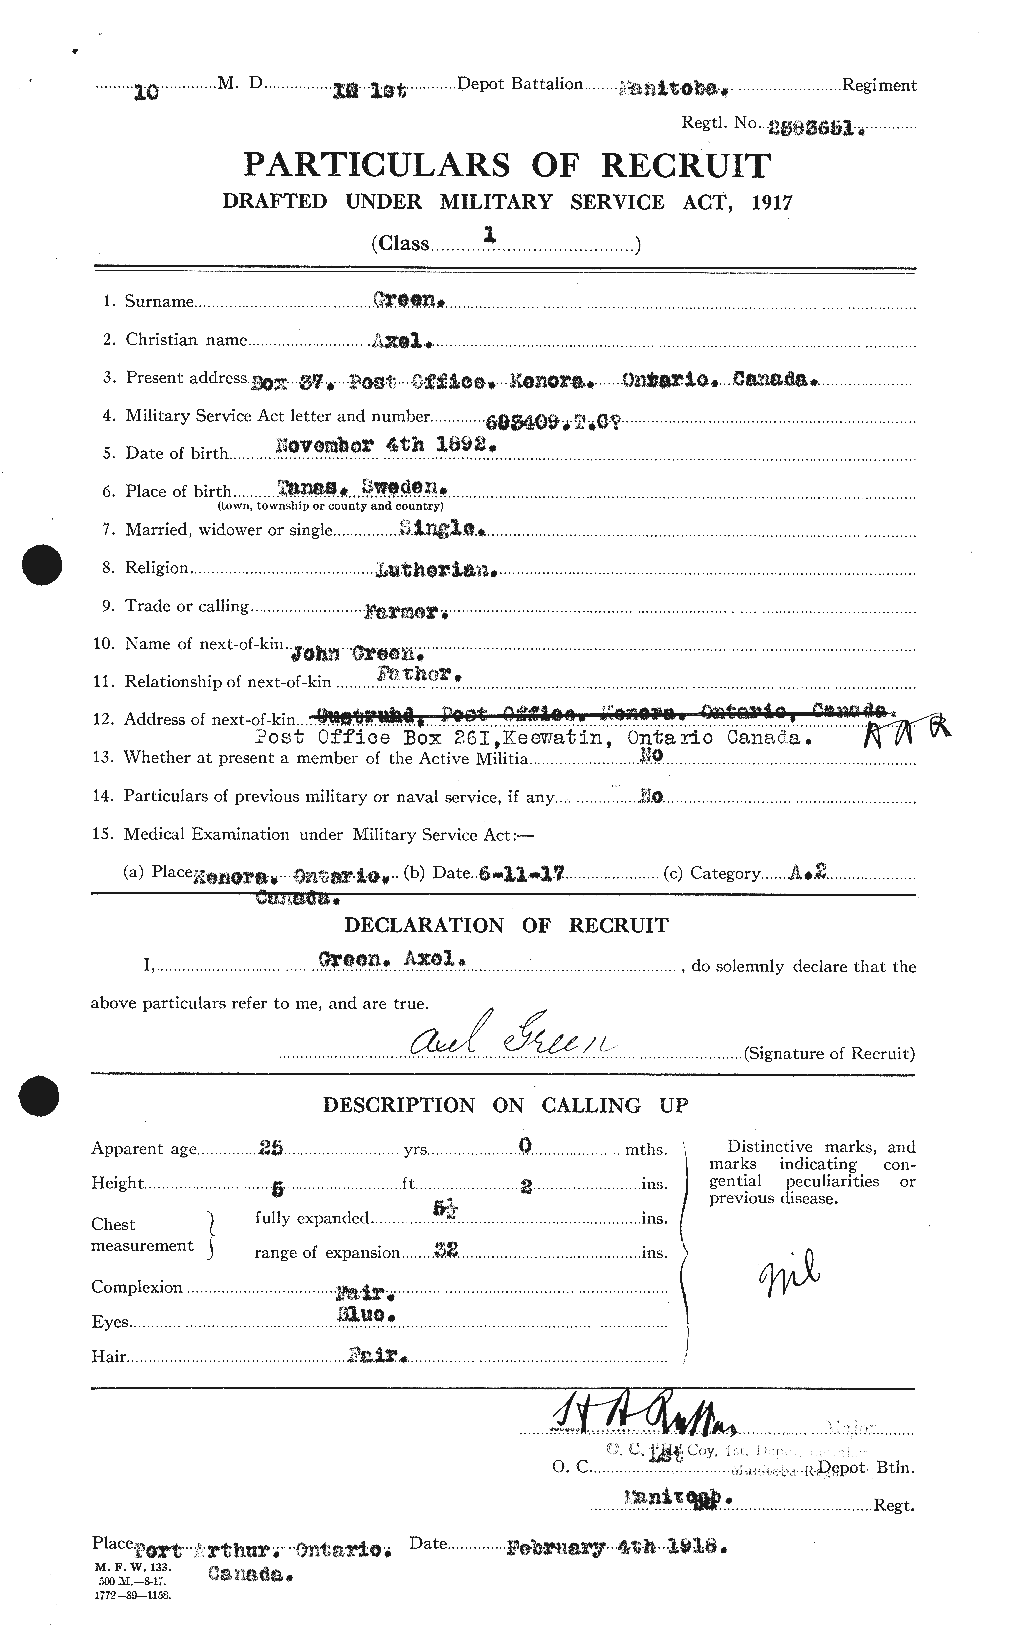 Personnel Records of the First World War - CEF 363859a